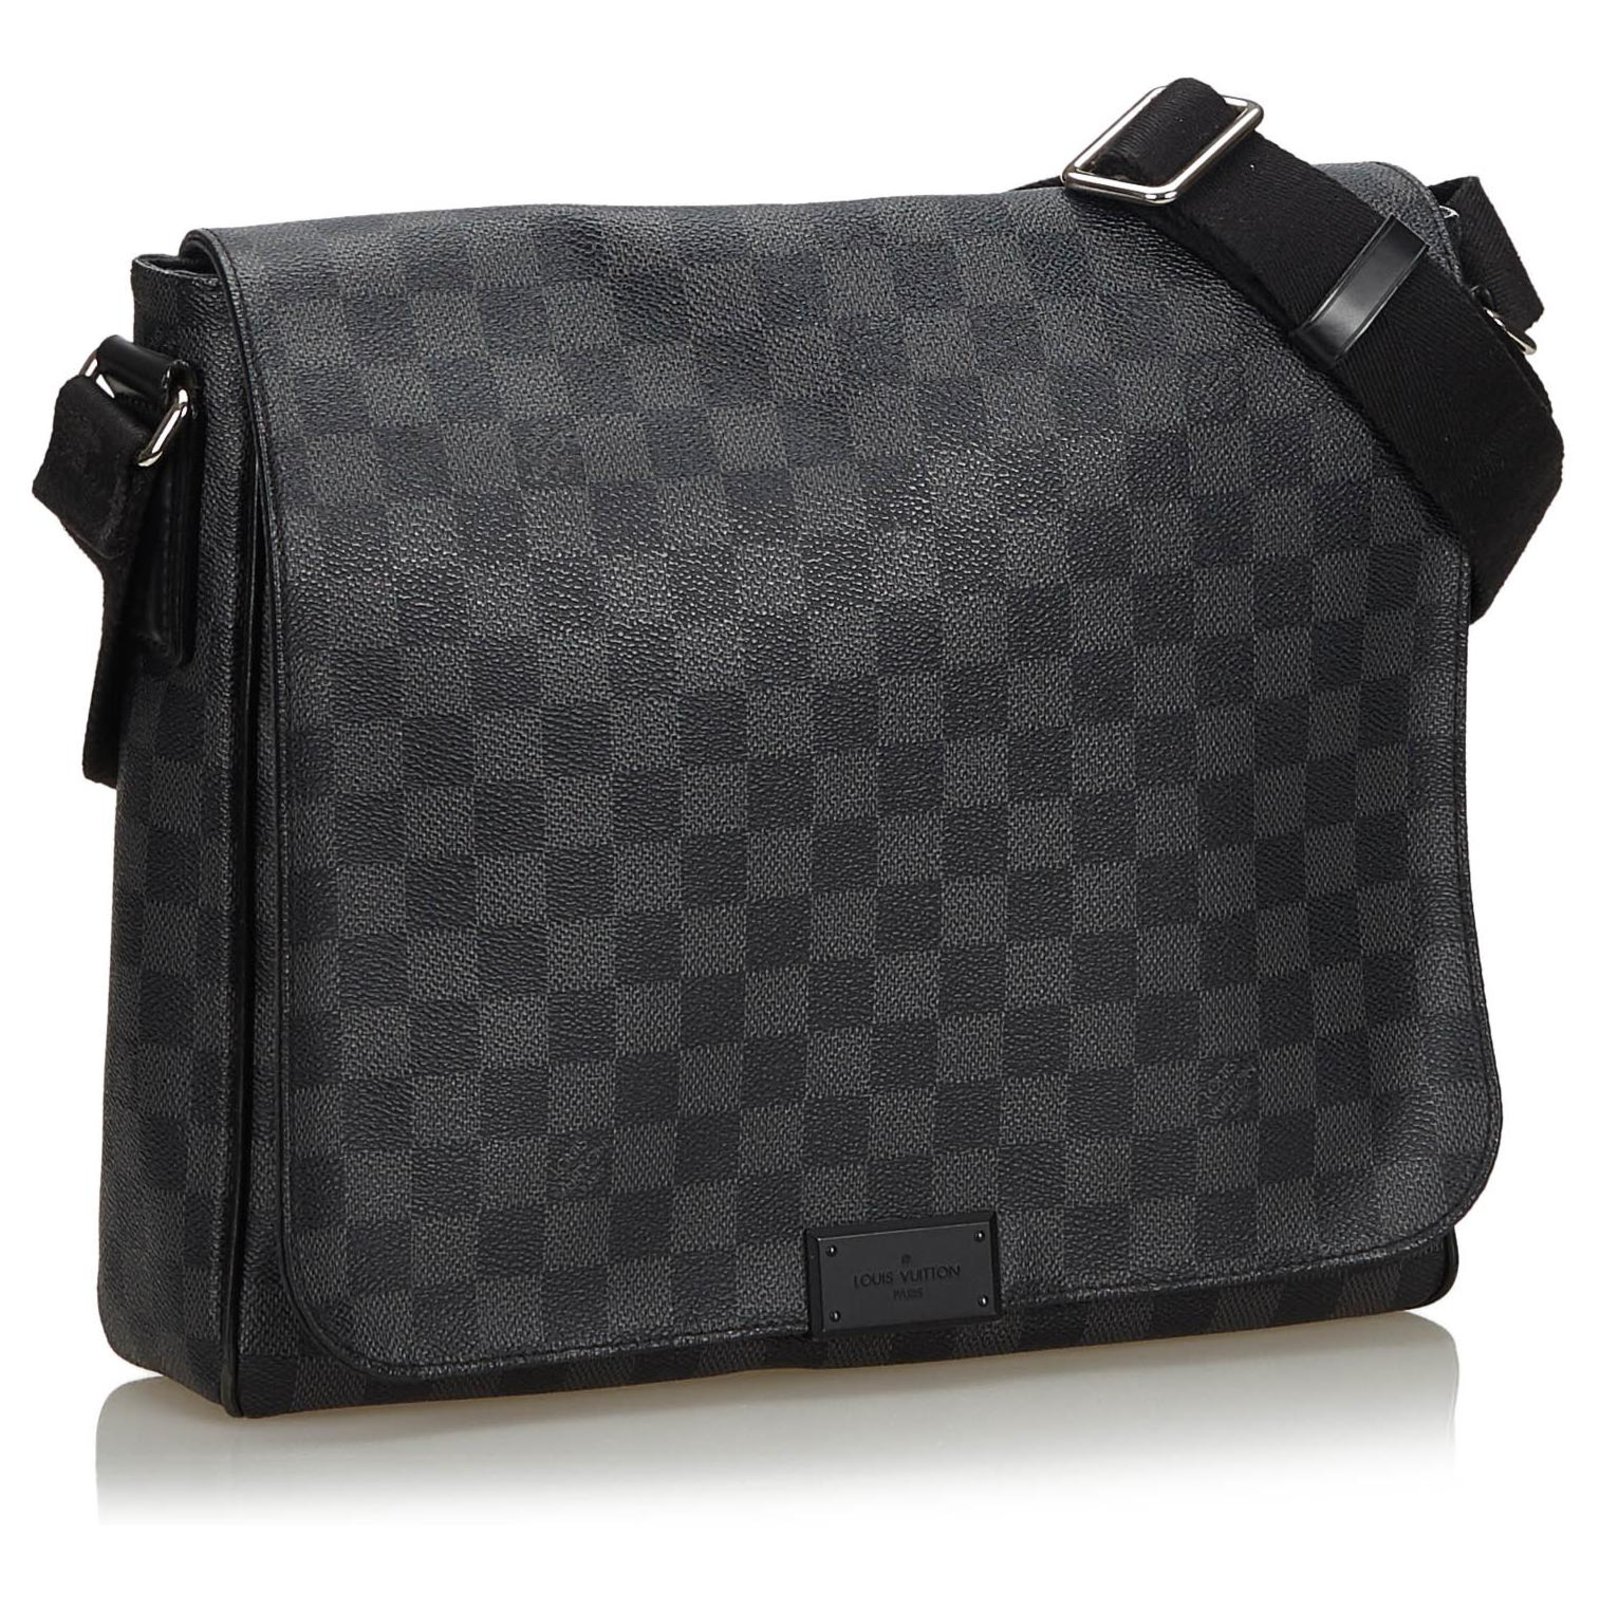 black and grey damier louis vuittons